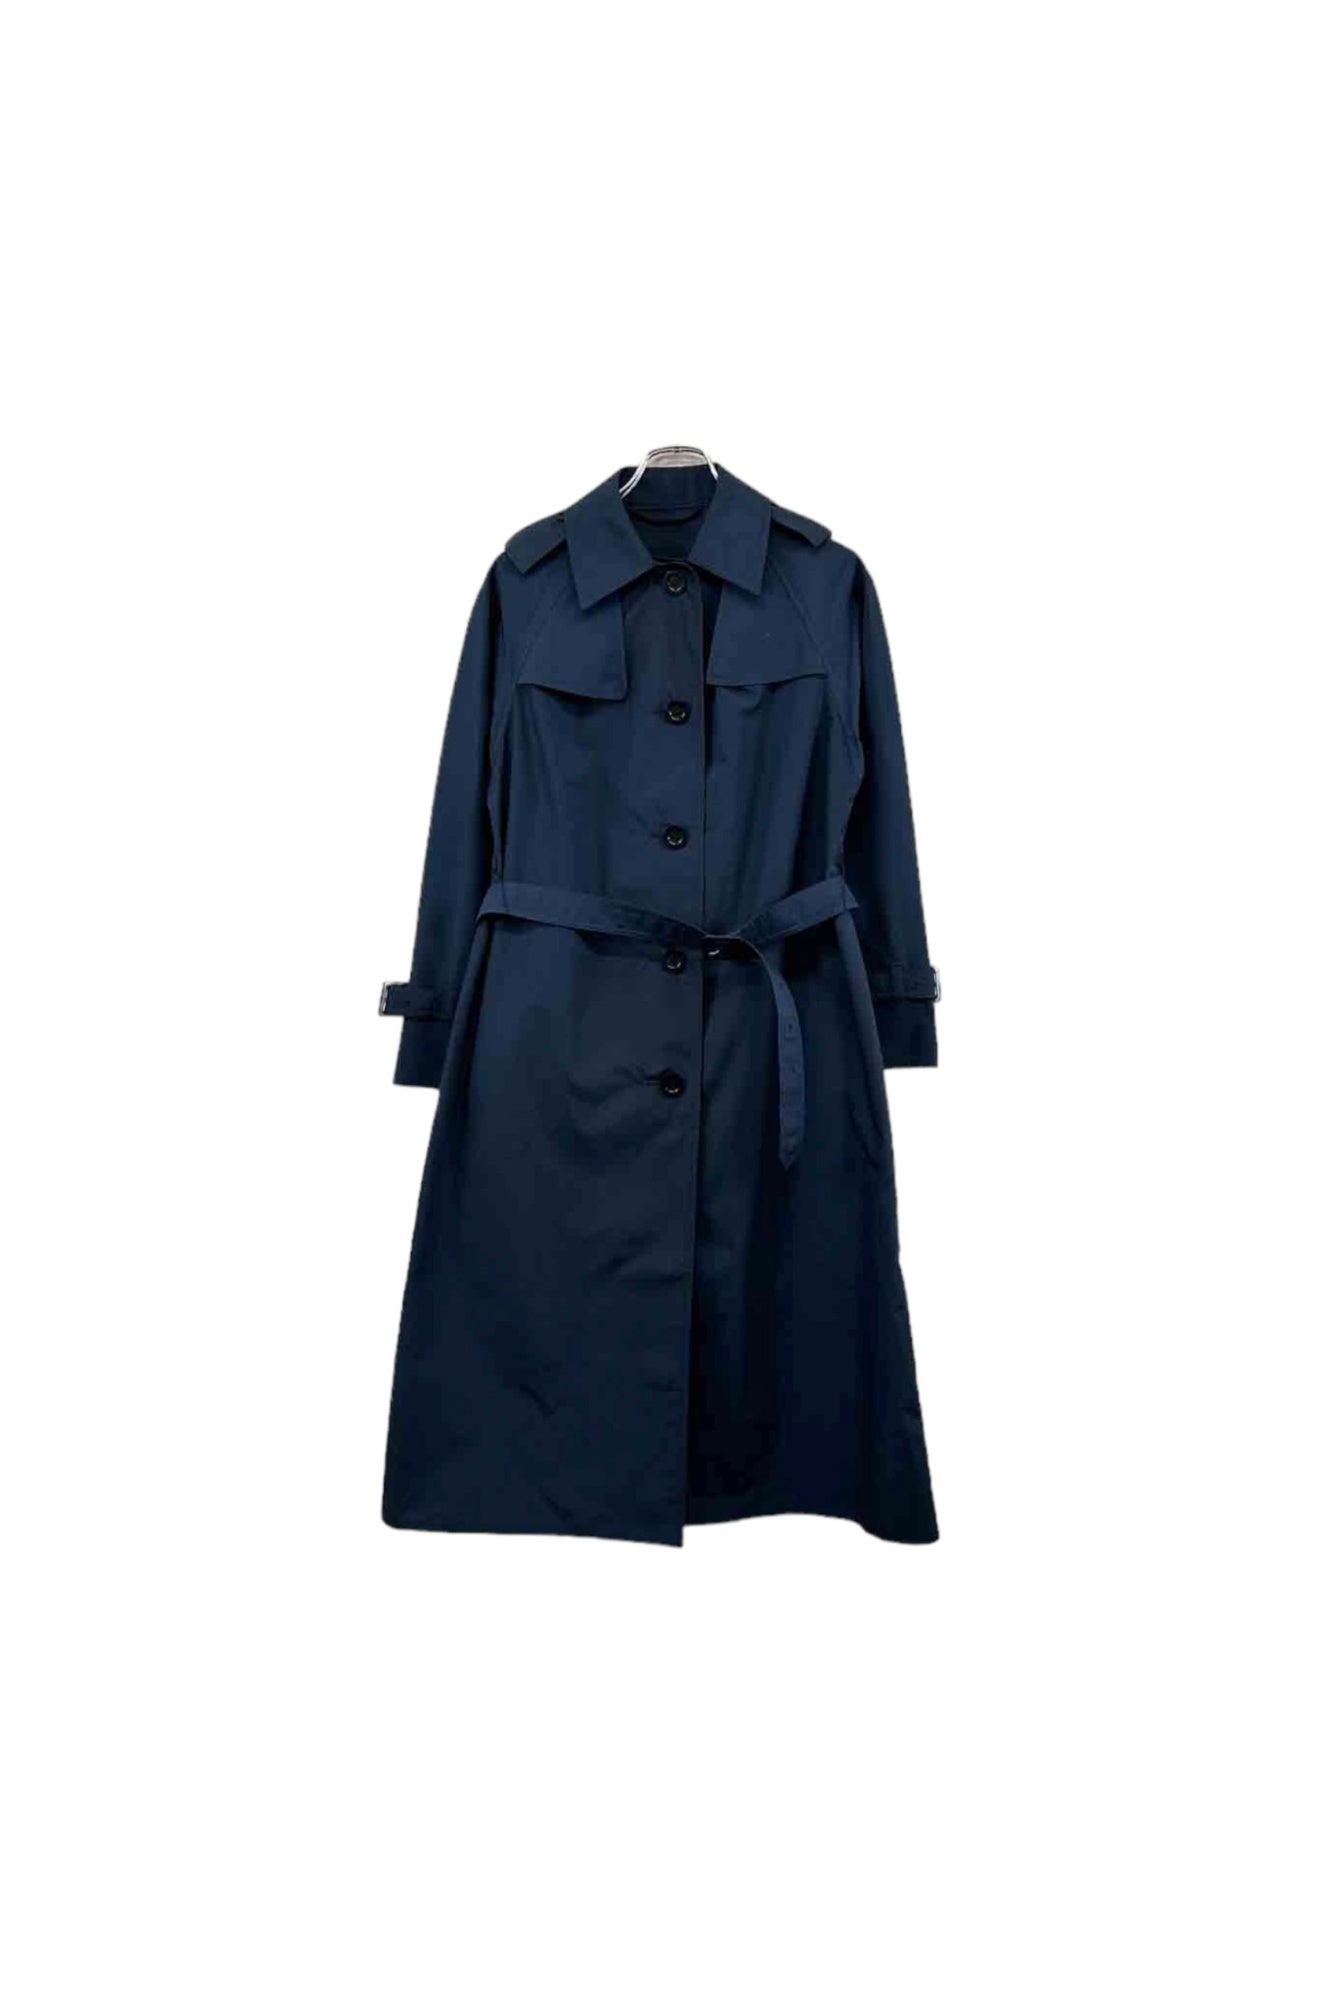 90's Made in ENGLAND Aquascutum blue trench coat